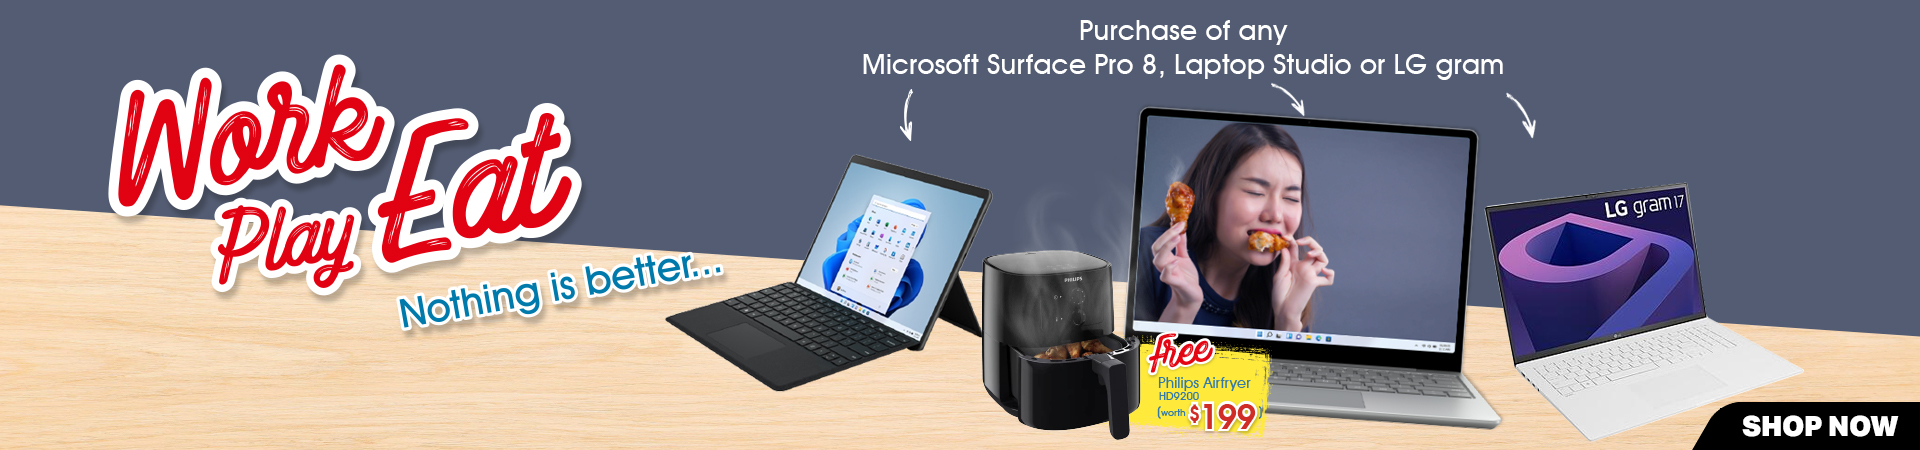 Free Air Fryer Promotion Microsoft and LG gram